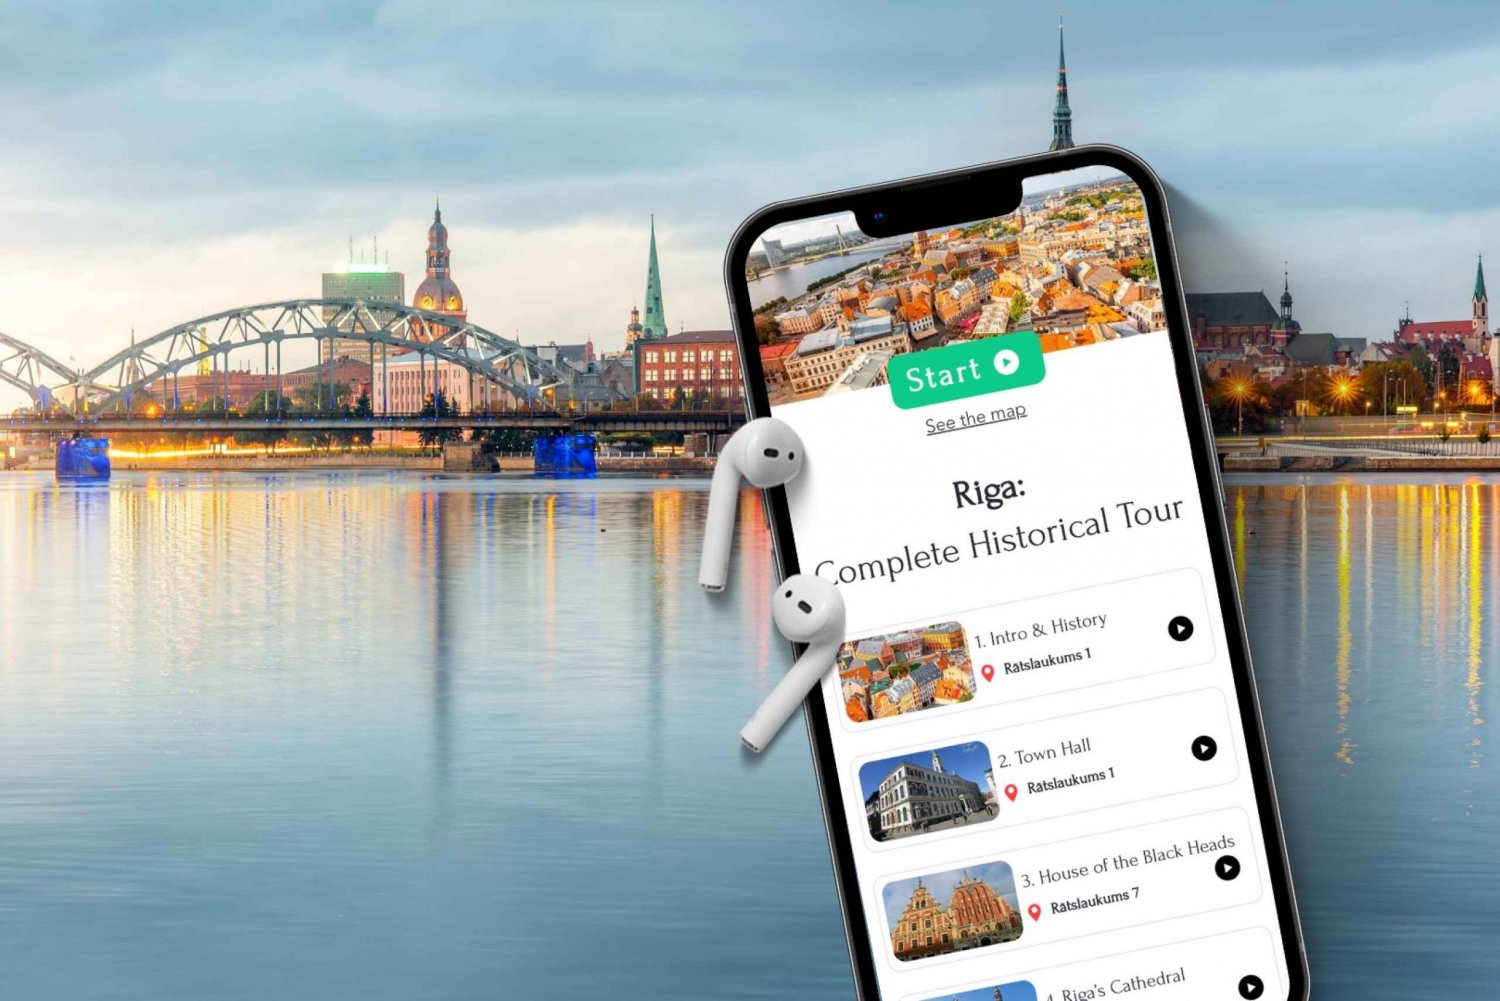 Riga: Complete Self-guided Audio Tour on your Phone